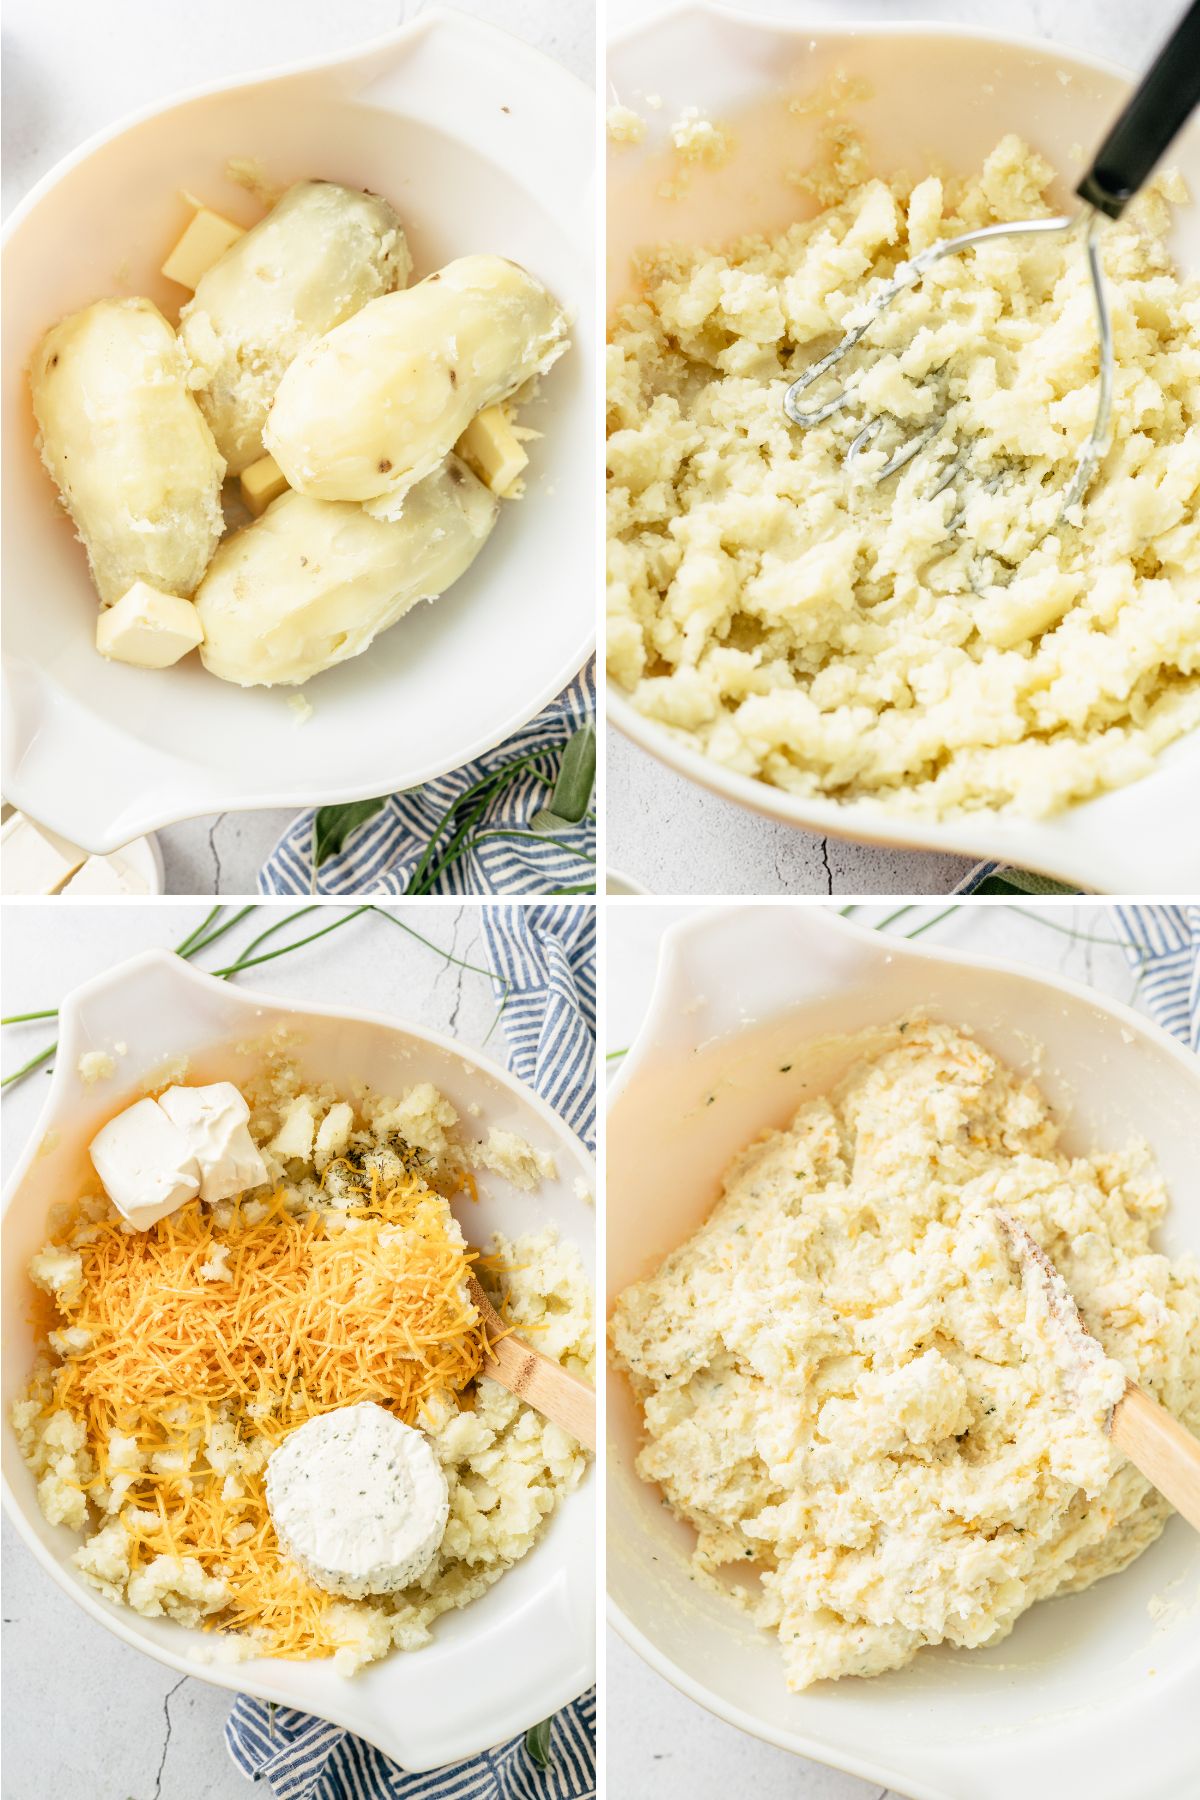 step-by-step instructions for how to make Mashed Potatoes with Cheese using russet potatoes without potato skin, Boursin cheese, cream cheese and spices.